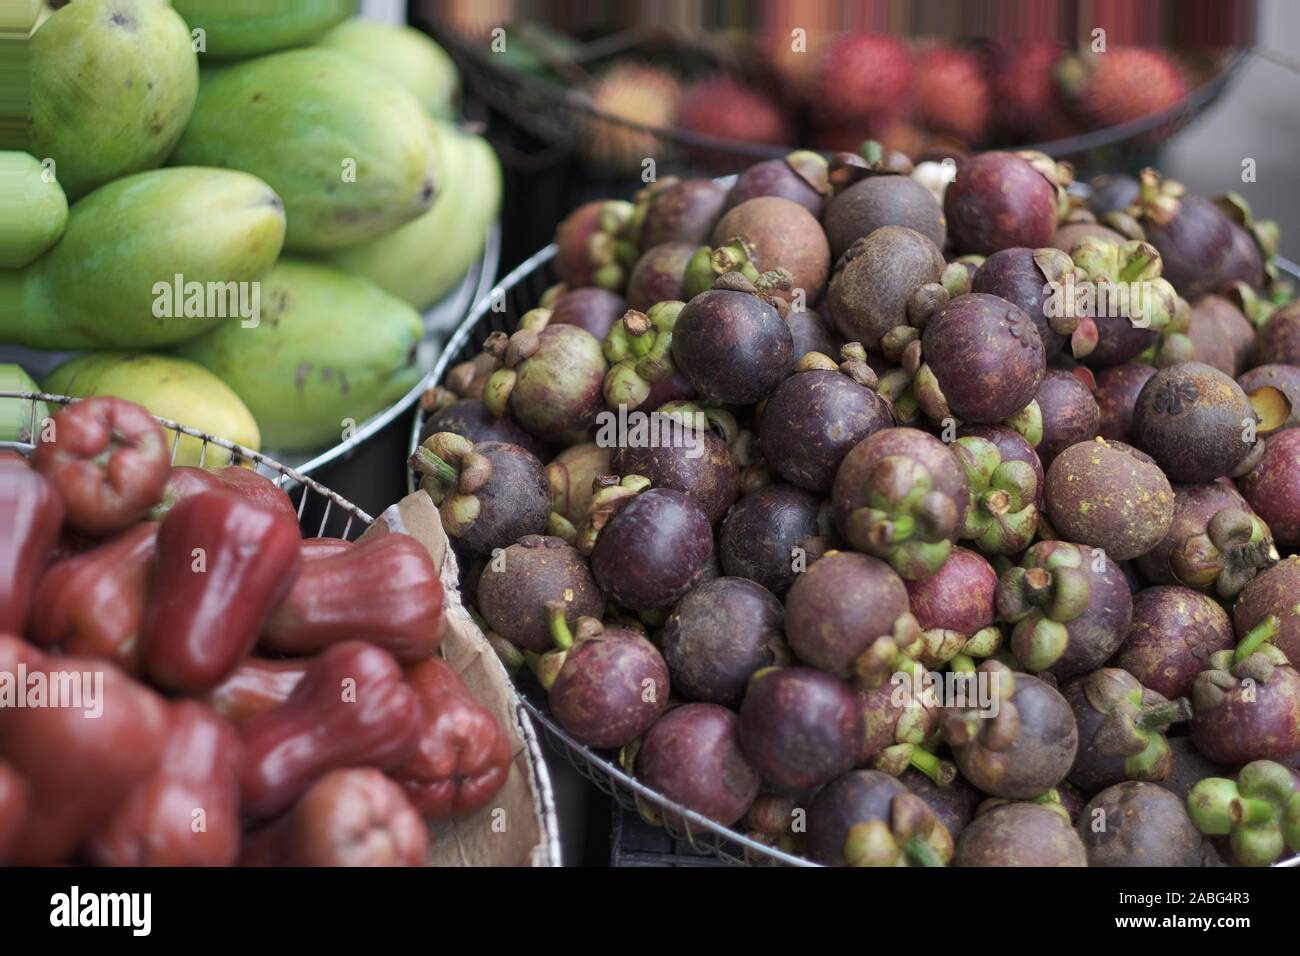 Baskets with a variety of exotic fruits in the Asian market Stock Photo